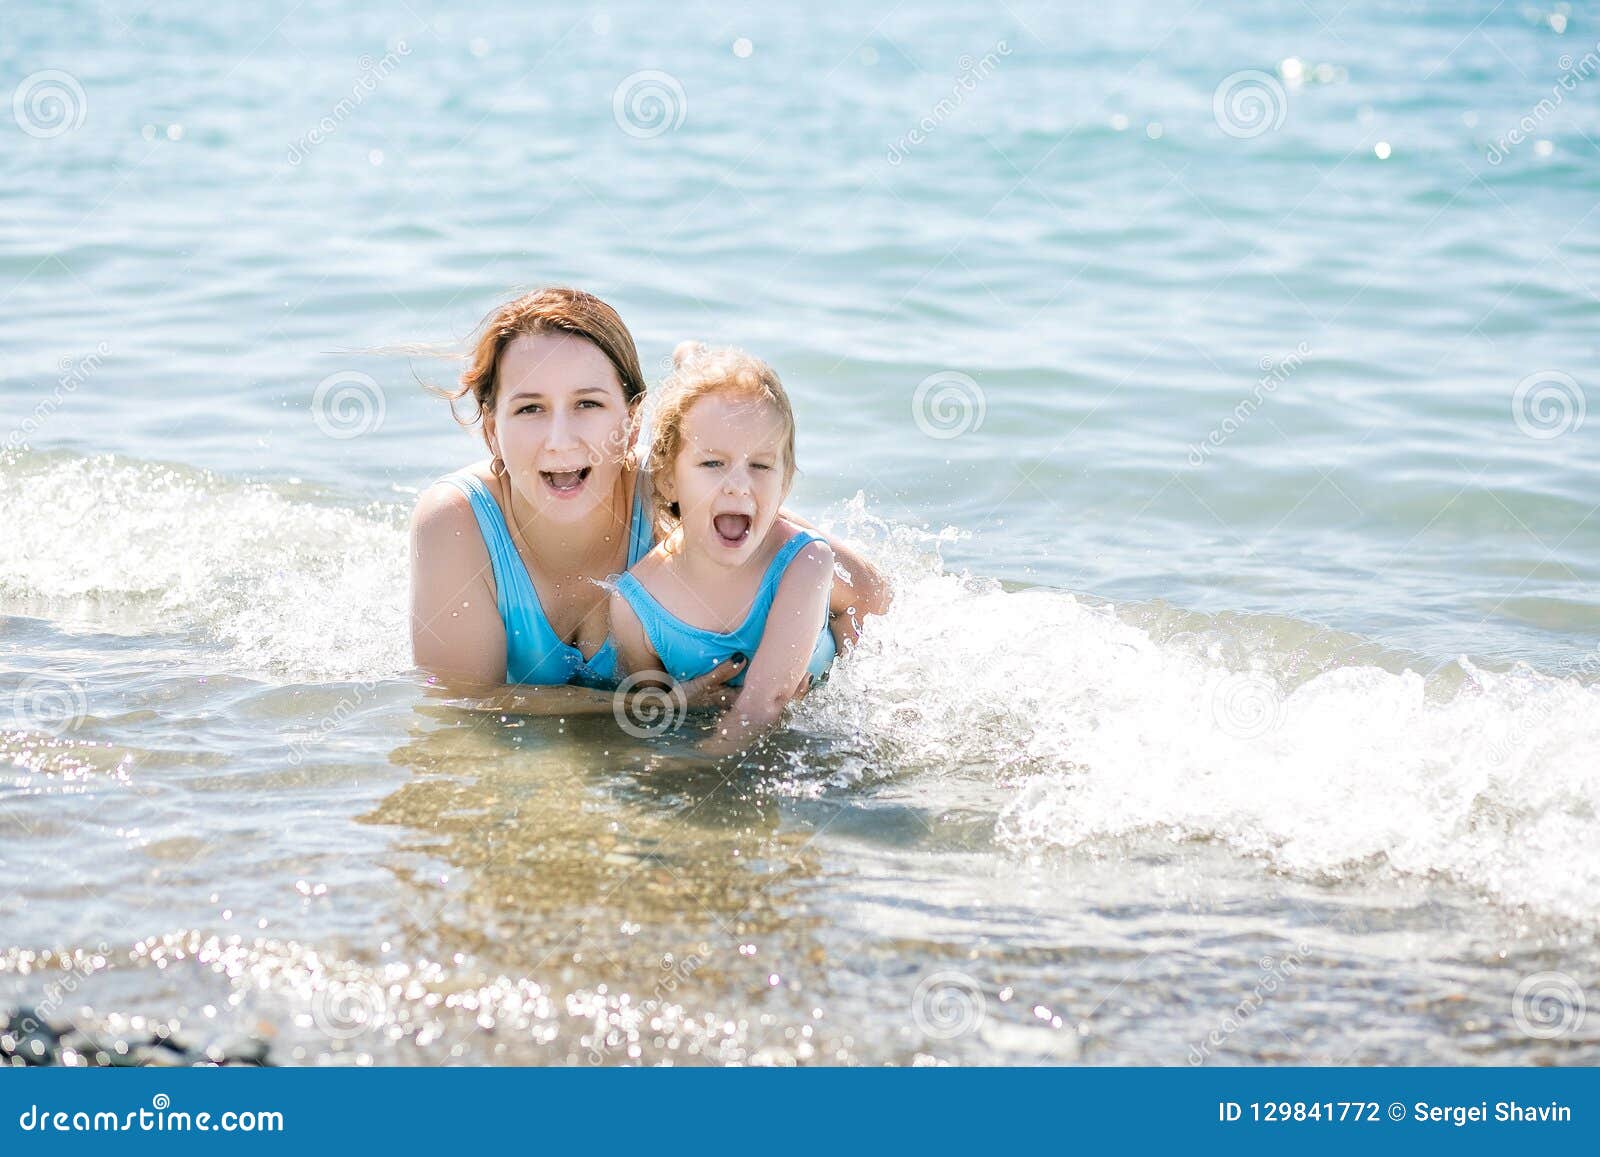 Beautiful Young Mother And Daughter Having Fun Resting On The Sea They 